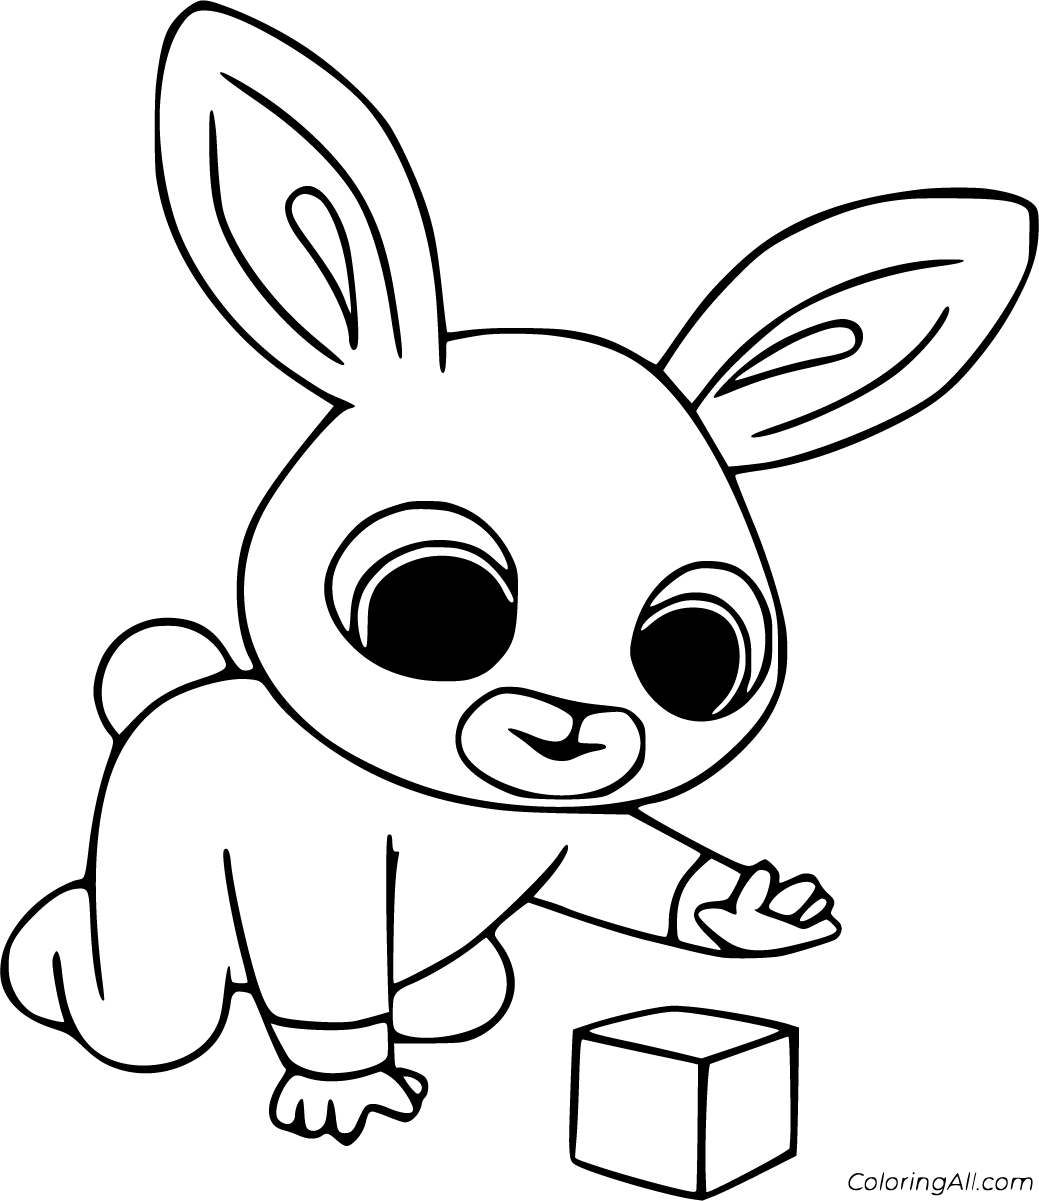 Bing Bunny Coloring Pages (23 Free Printables) - ColoringAll